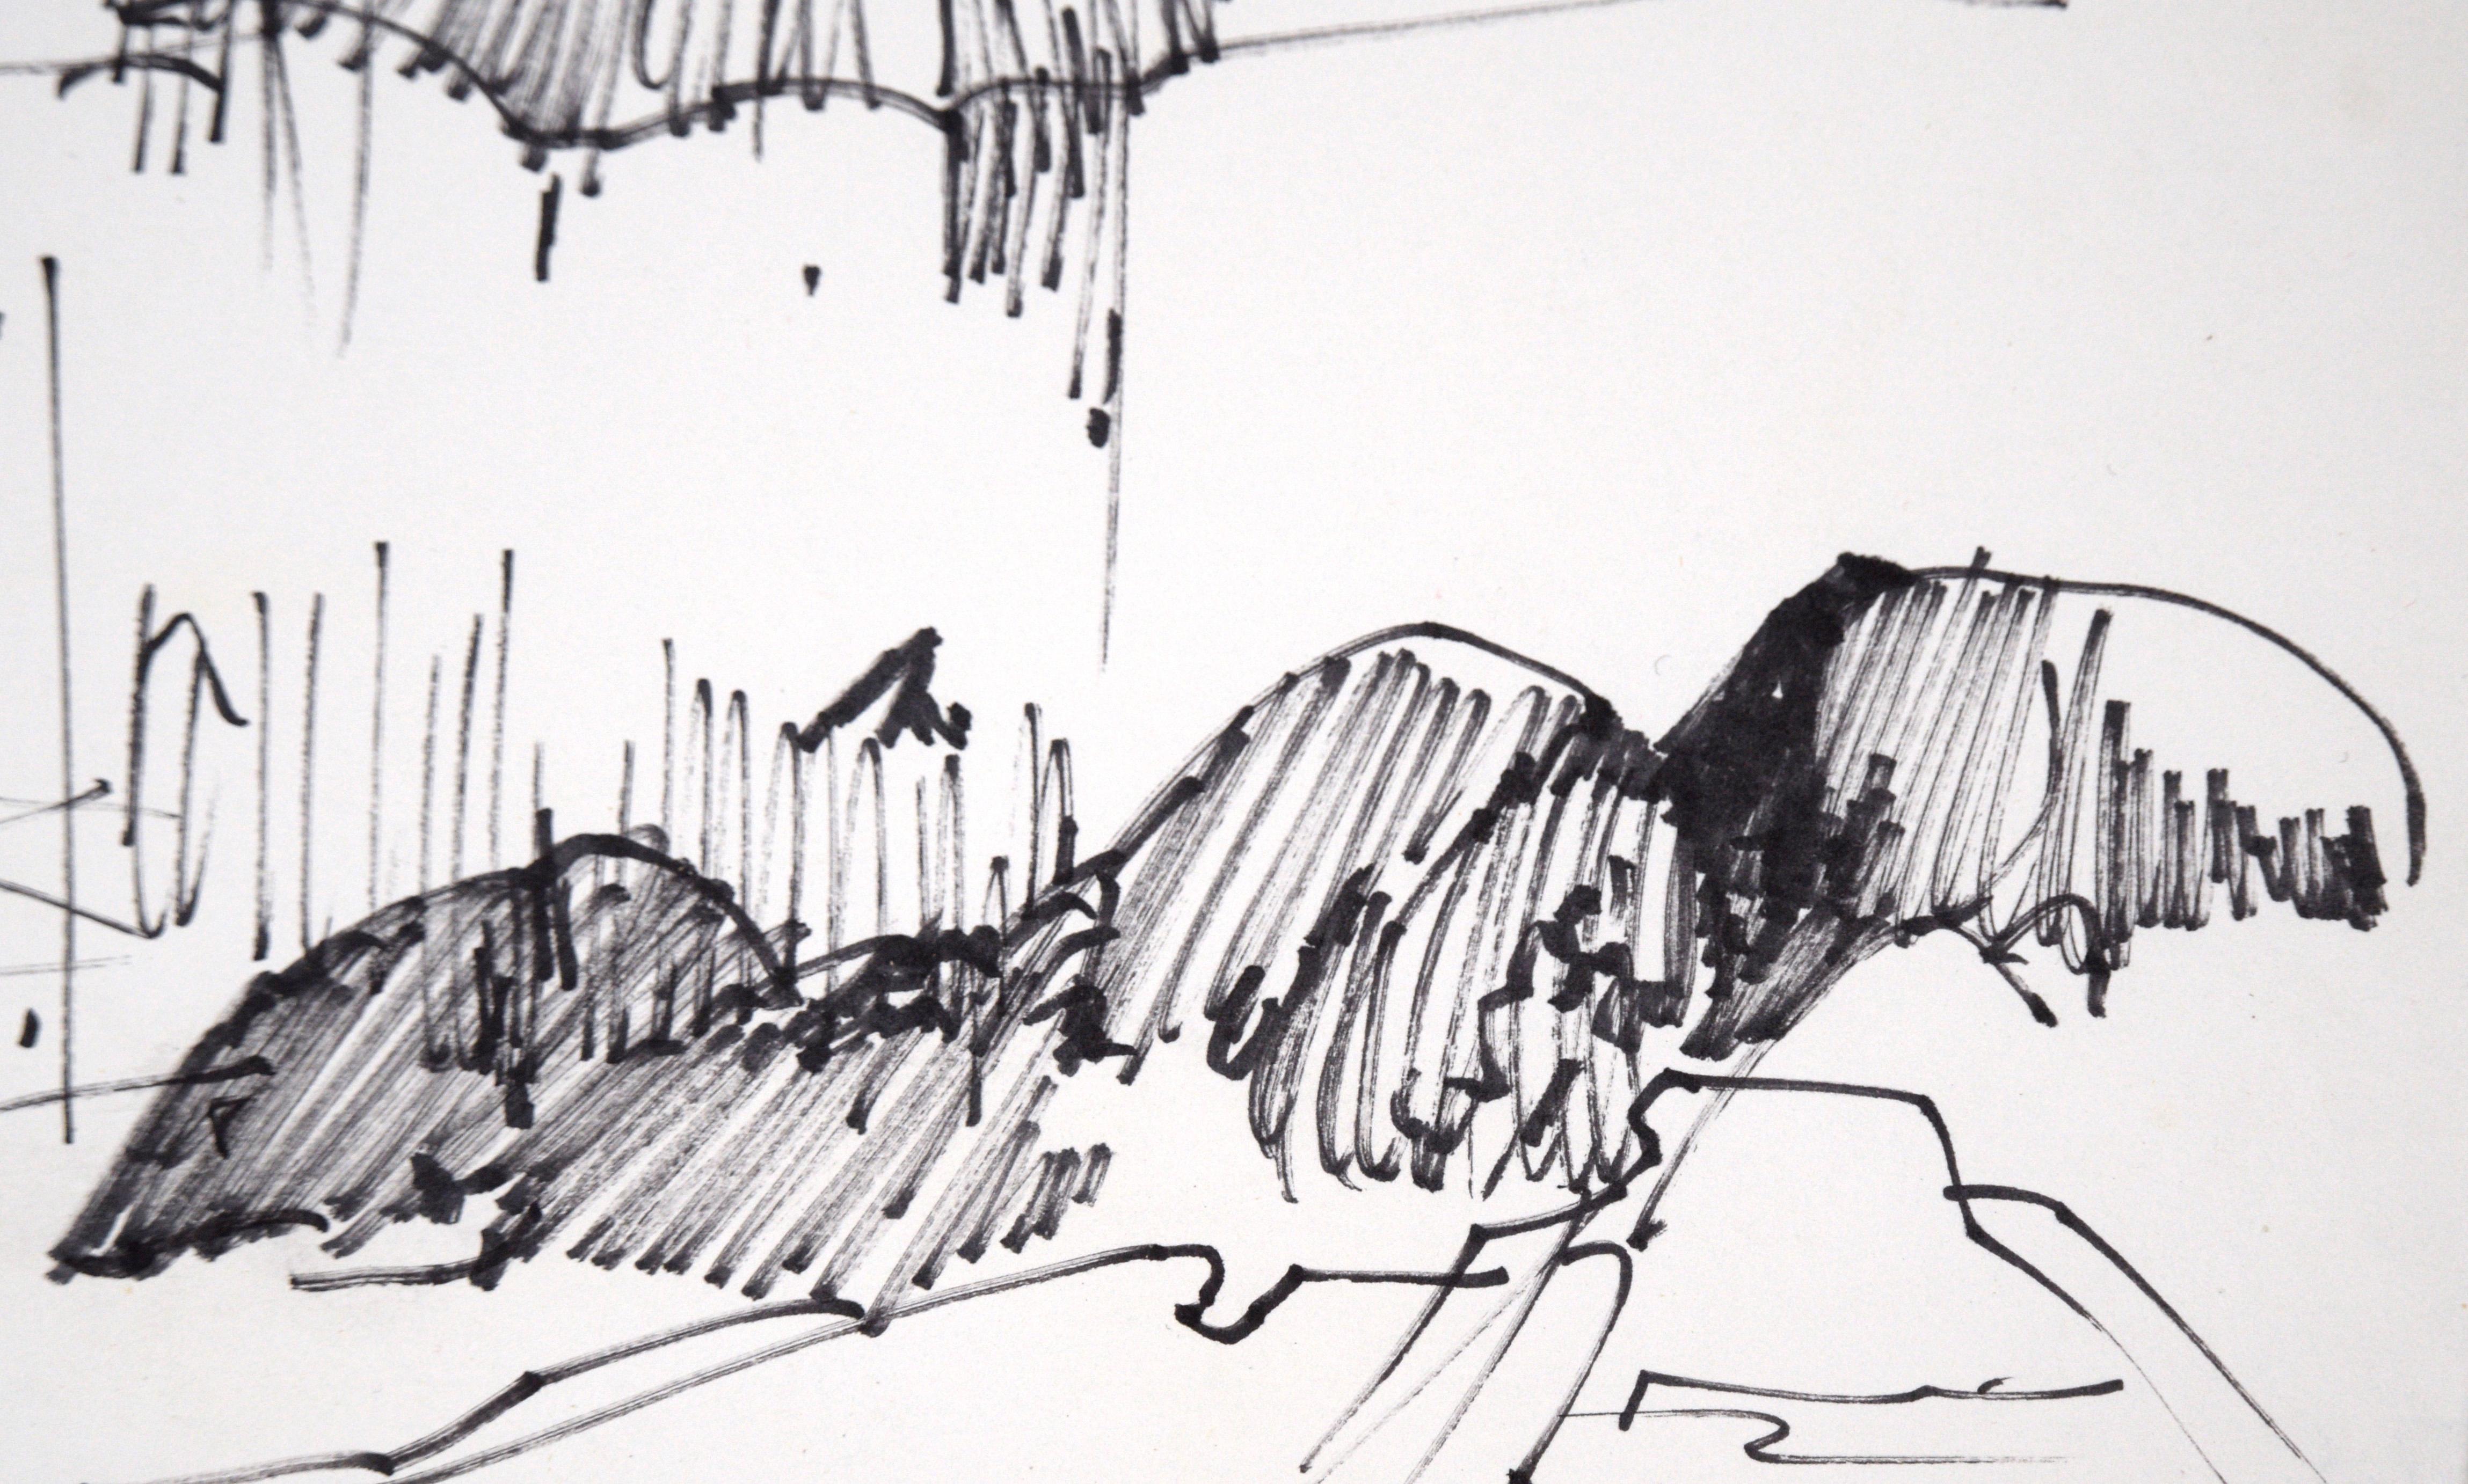 House Across the Lake - Line Drawing Landscape in Ink on Paper - Black Landscape Art by Laurence Sisson